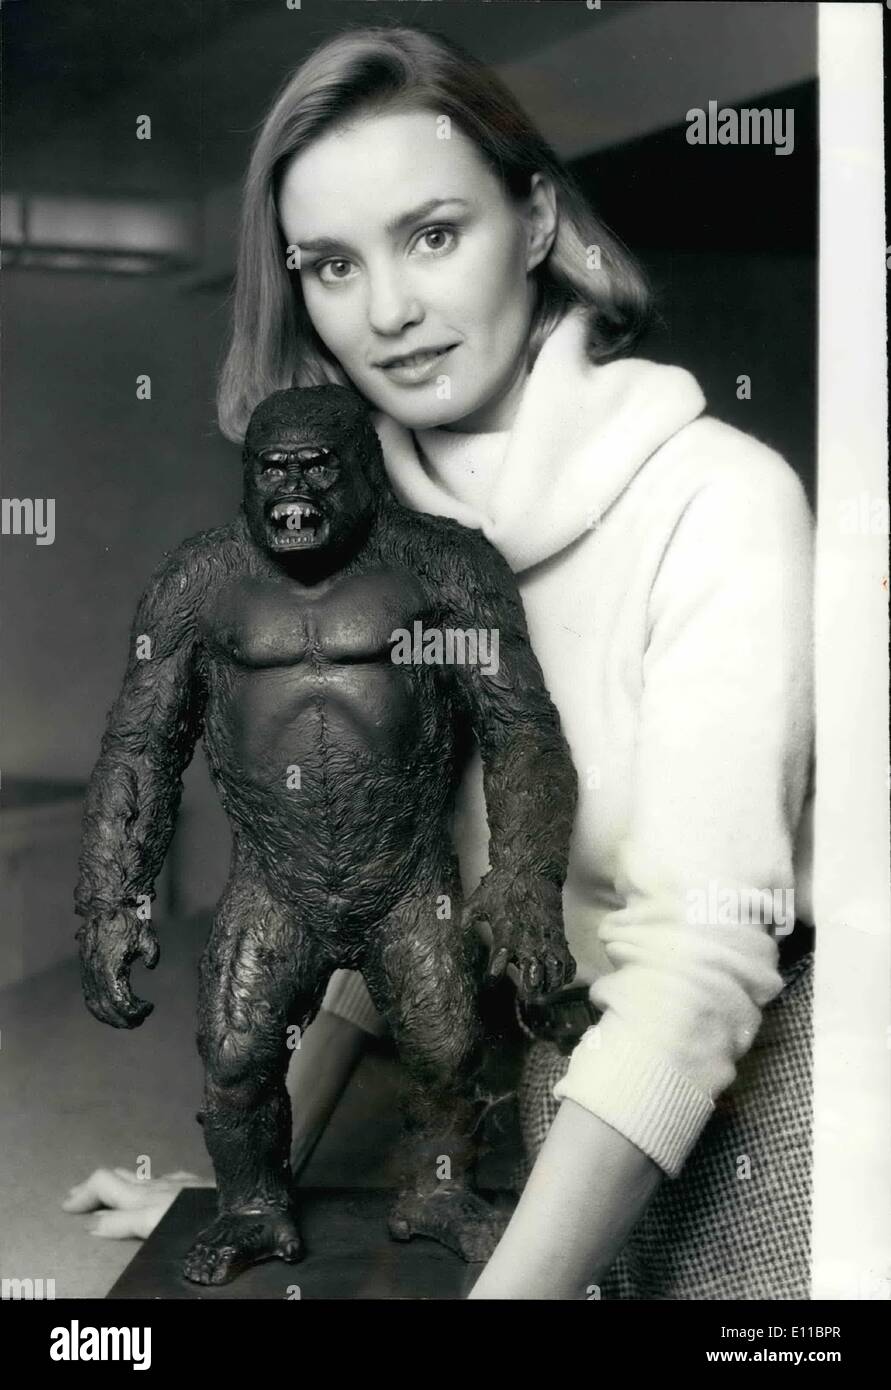 Dec. 12, 1976 - Reception For Jessica Lange - Star Of ''King Kong'': There was a reception today at the Savoy Hotel for King Kong's newest girl friend, Jessica Lange who plays the part in the film made famous by Fay Wray in the remake of King Kong. Jessica was Chosen for the part of Dawn from hundreds of eligible actresses. The Kong that looms on the screen is an ingenious 40-foot mechanical monster, weighing 6 1/2 tons, electronically controlled by a complex hydraulic system Stock Photo